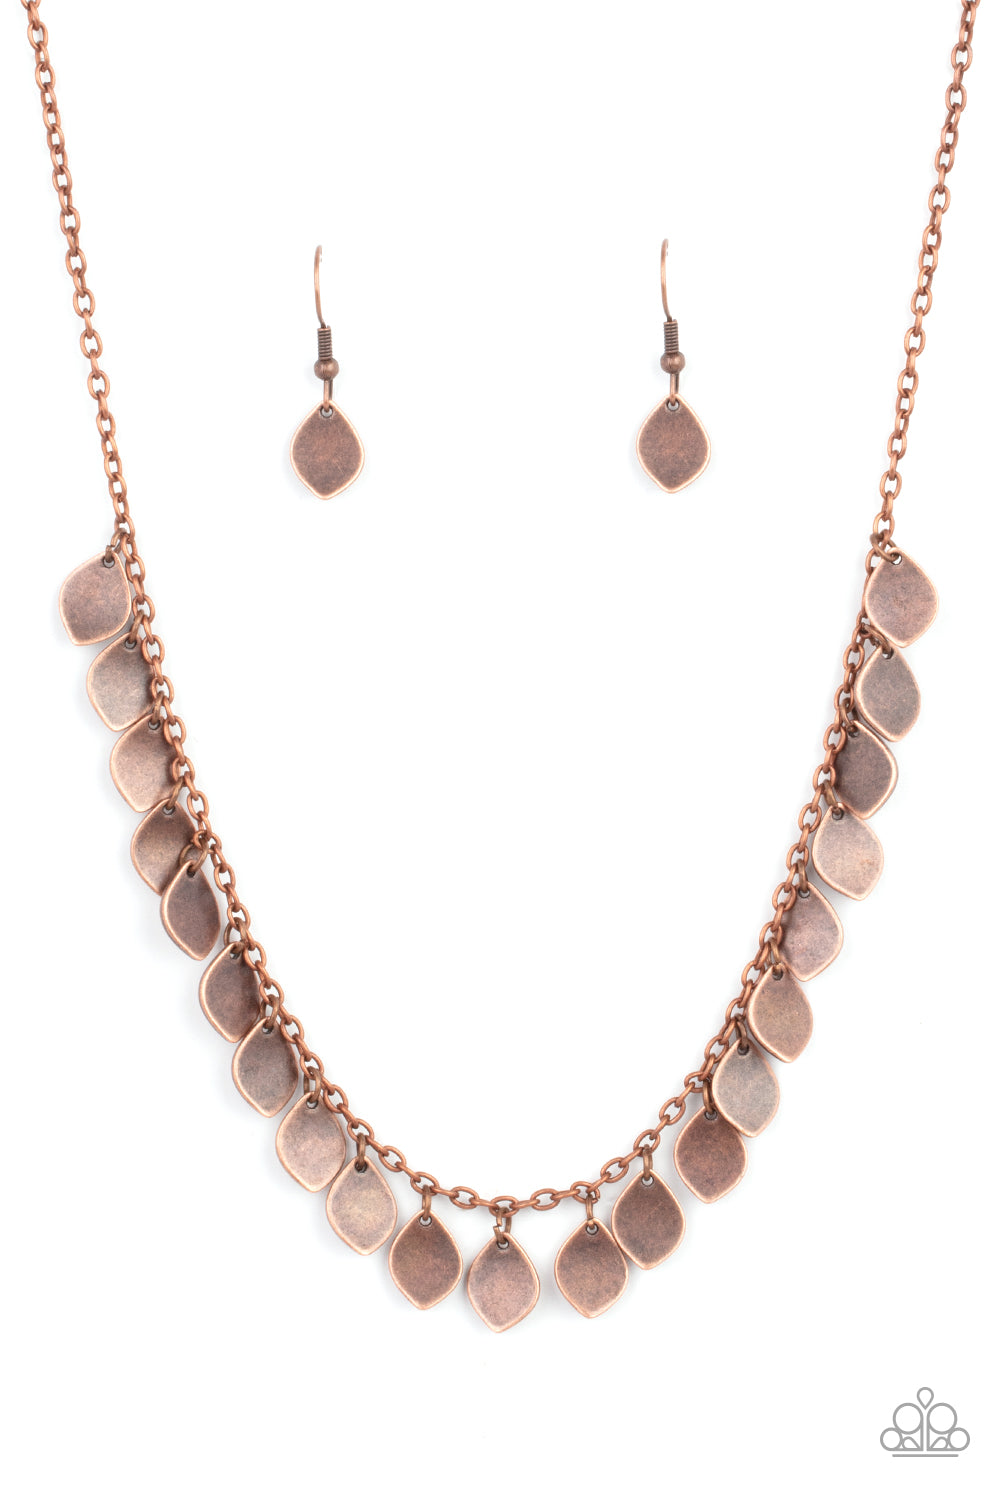 Teardrop copper discs drip from a dainty copper chain, creating a rustic fringe below the collar. Features an adjustable clasp closure.